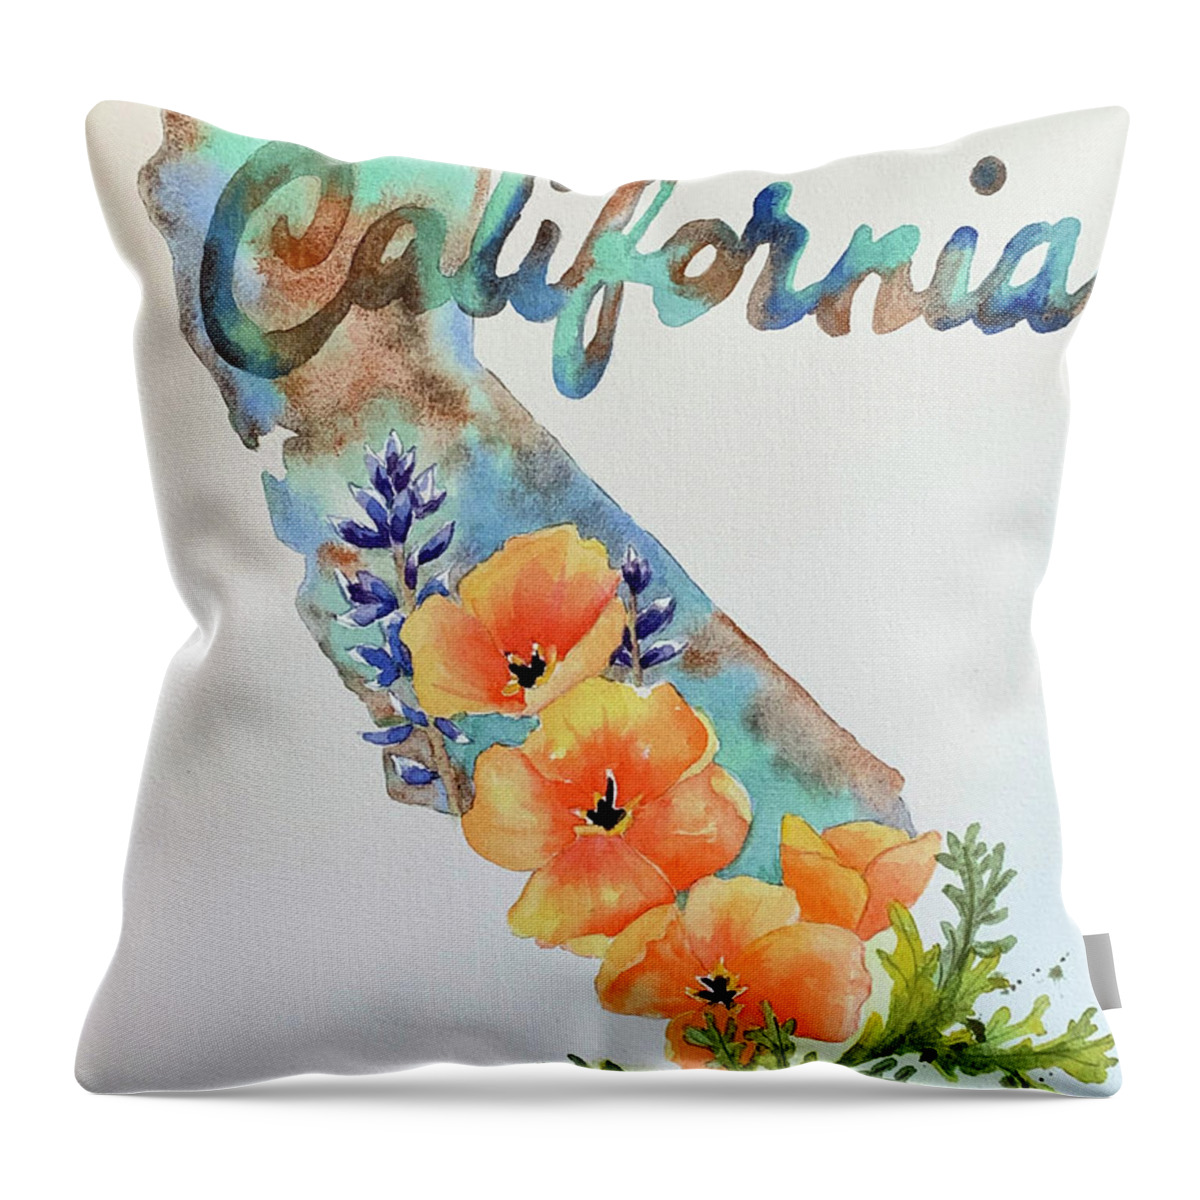 California Throw Pillow featuring the painting California Map by Hilda Vandergriff